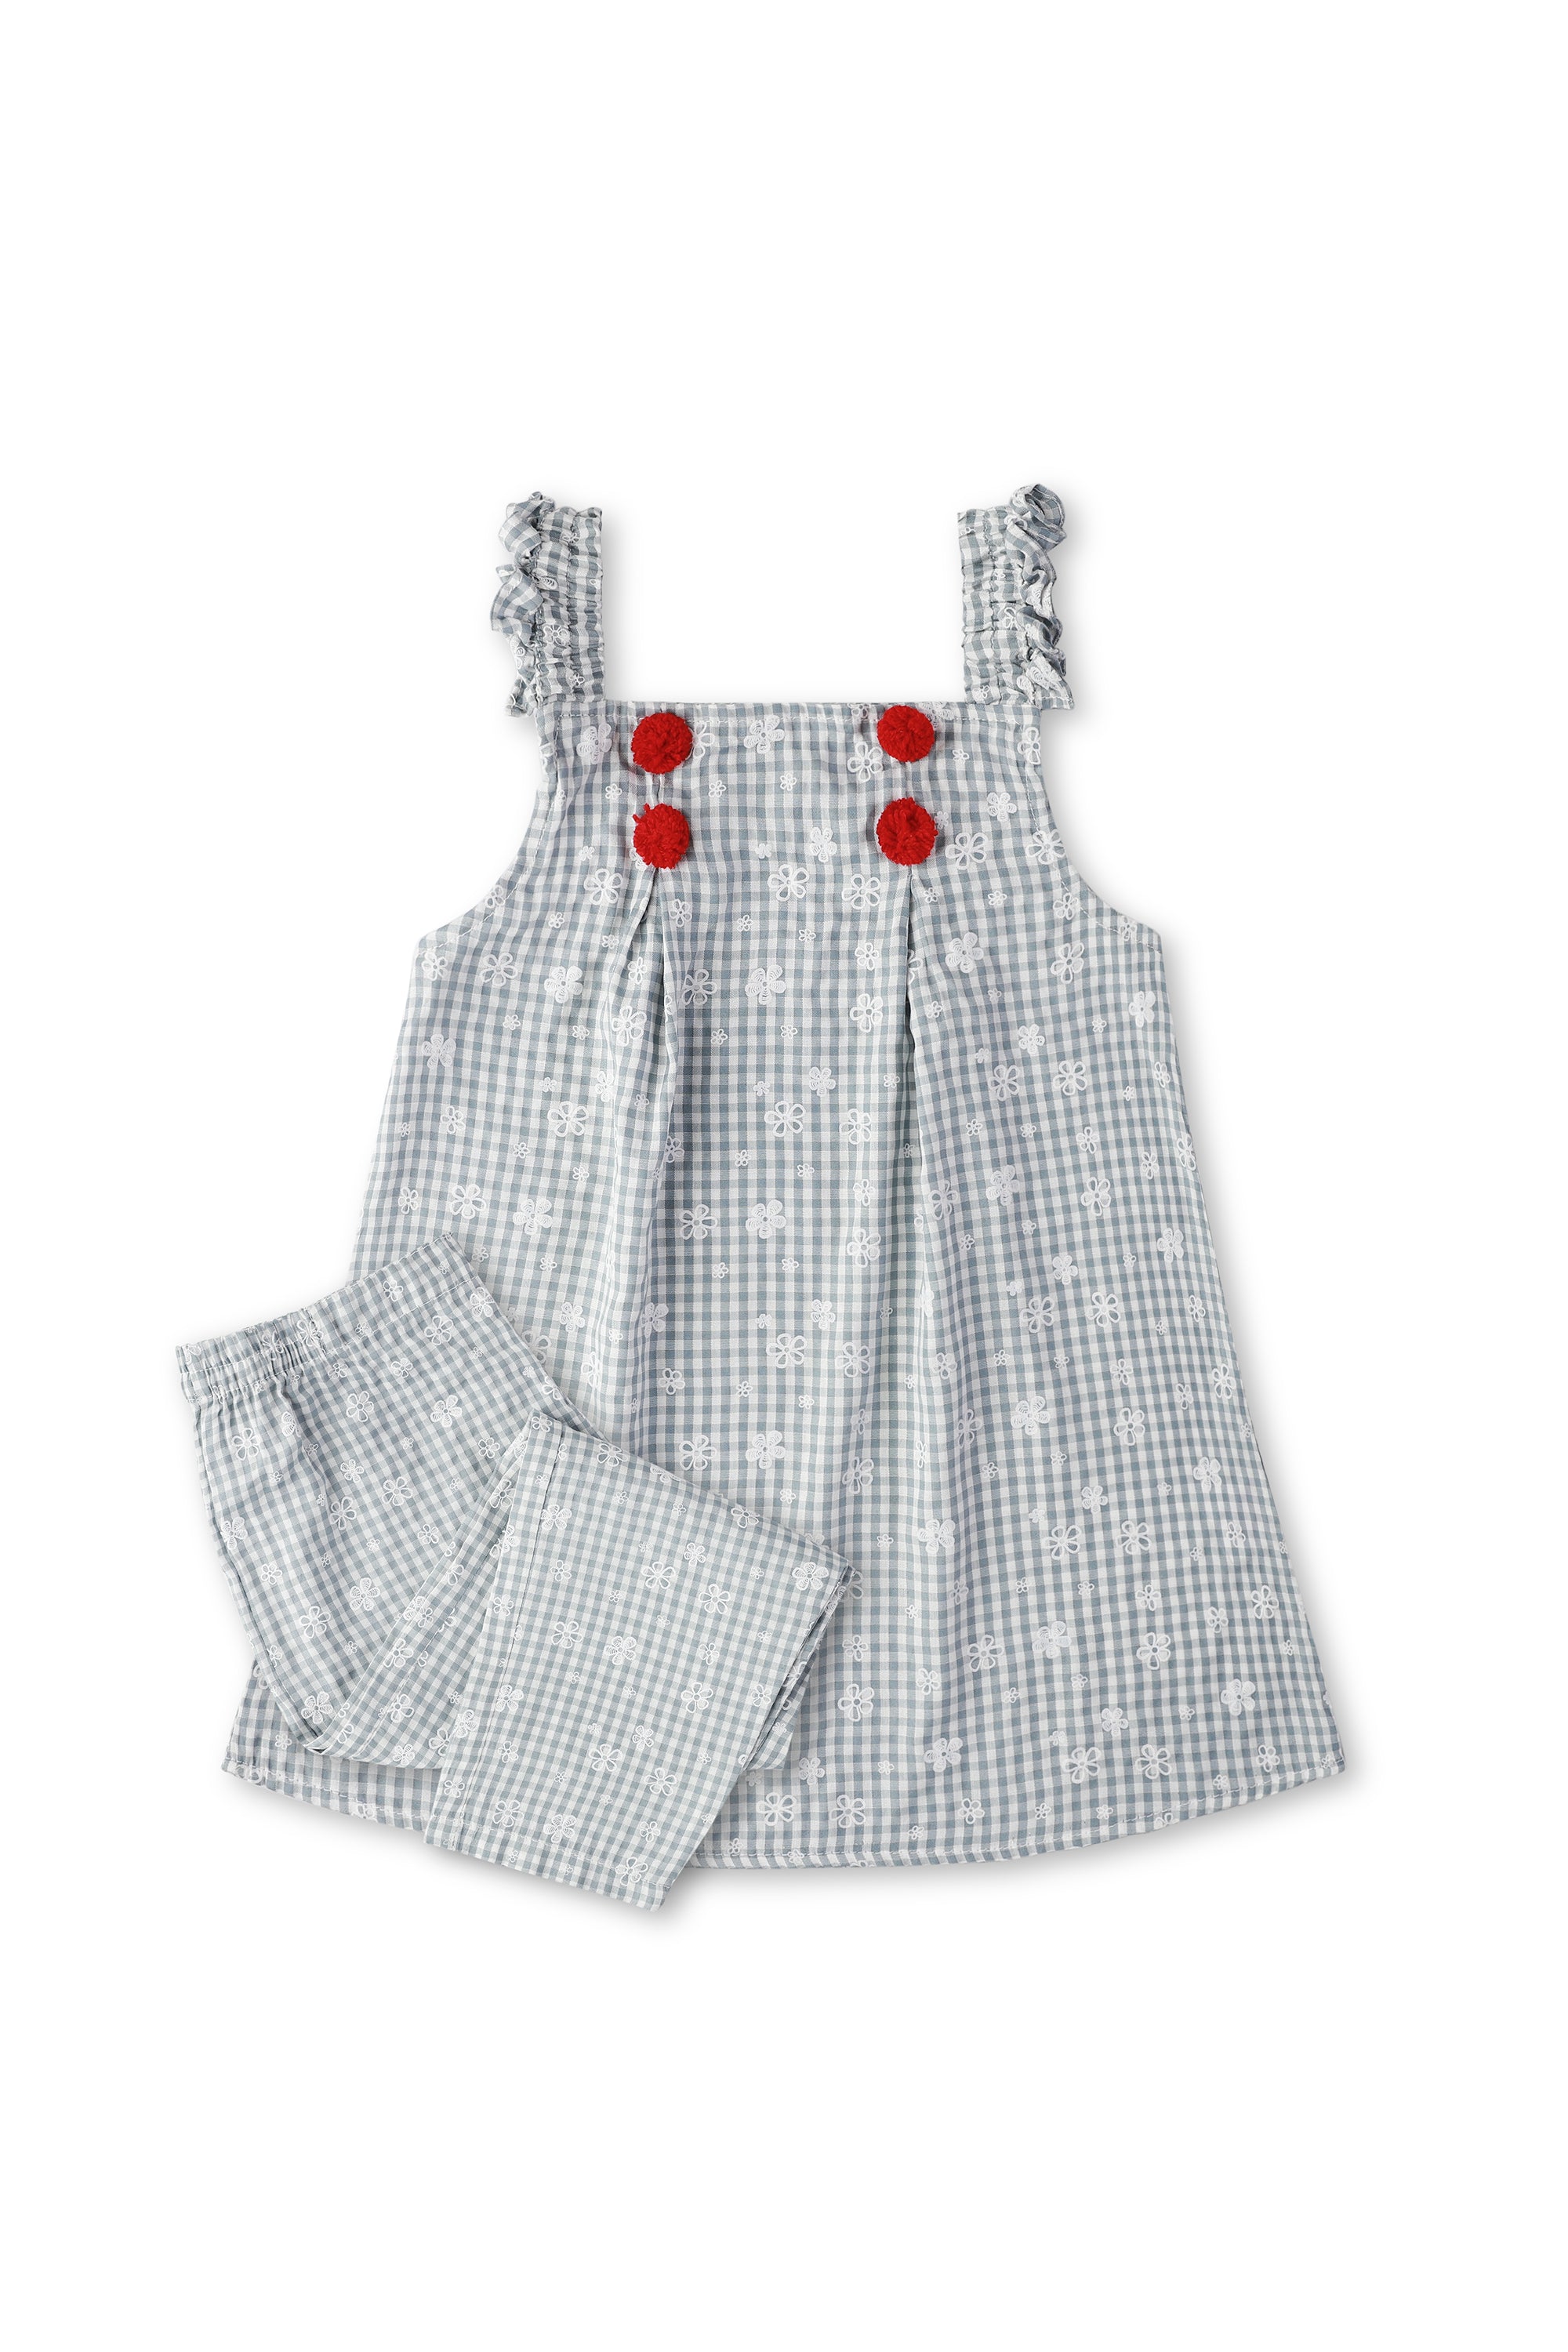 Chic Grey & White Checked 2 pc coord set for Girls